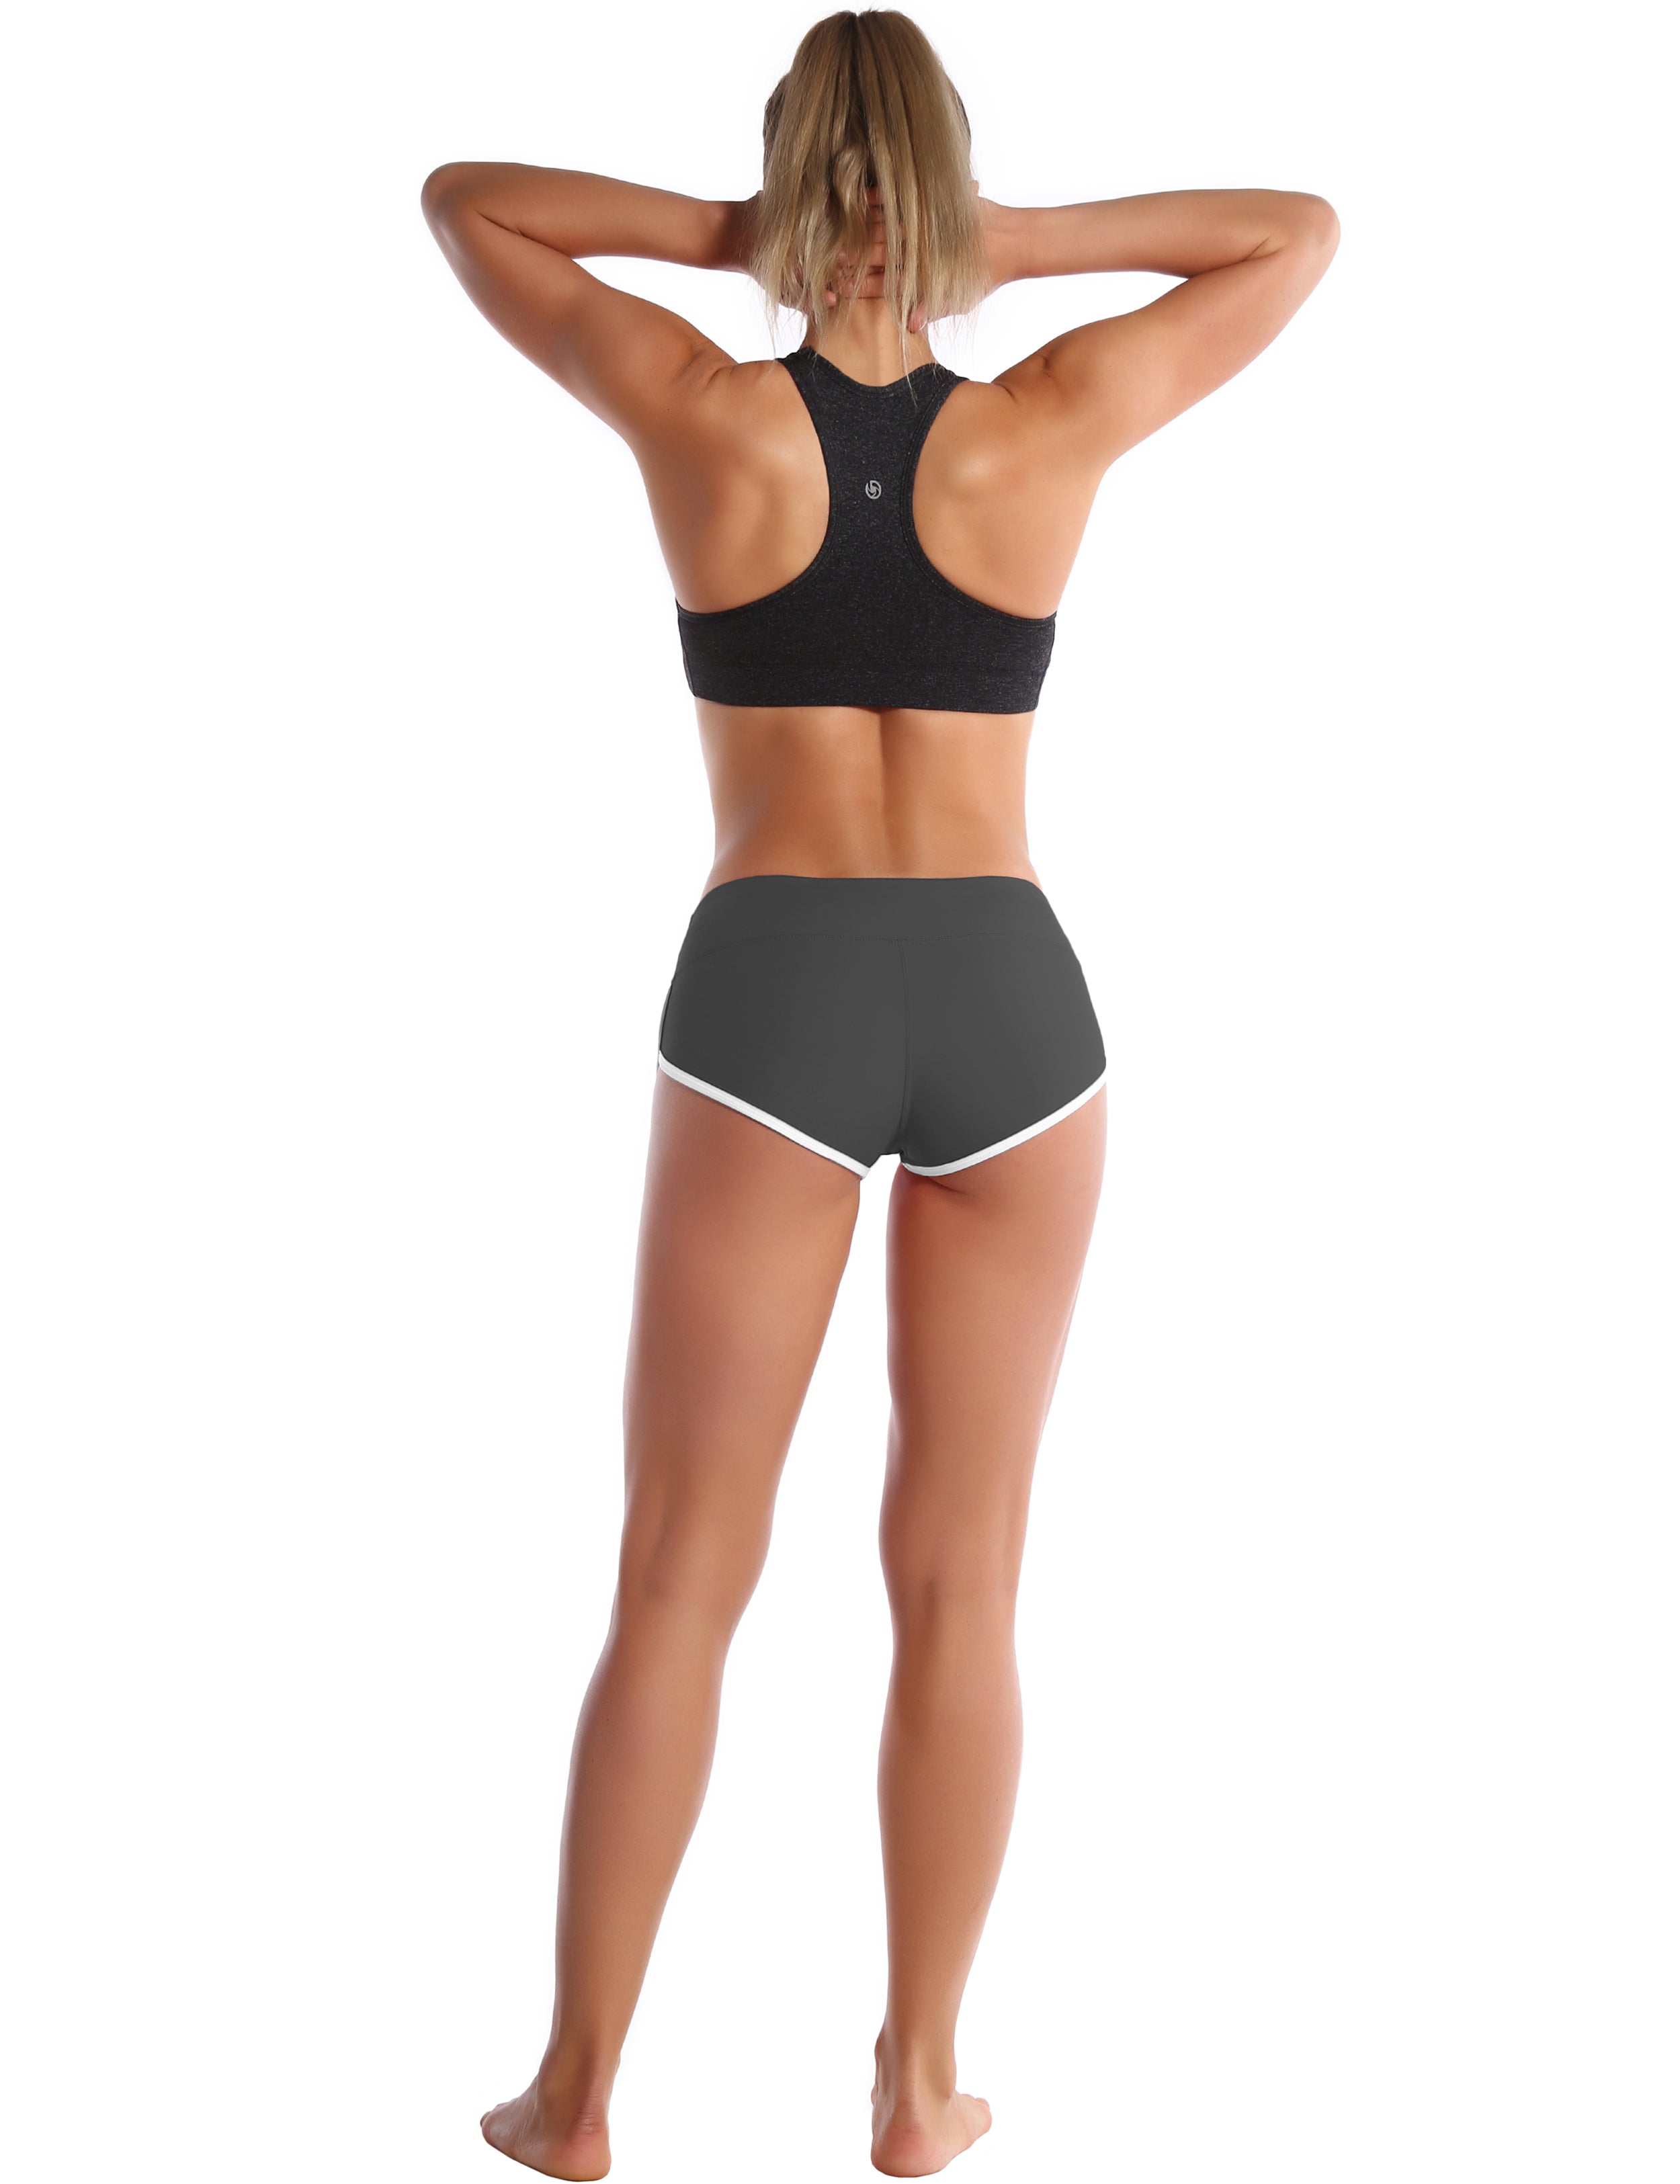 Sexy Booty Yoga Shorts shadowcharcoal Sleek, soft, smooth and totally comfortable: our newest sexy style is here. Softest-ever fabric High elasticity High density 4-way stretch Fabric doesn't attract lint easily No see-through Moisture-wicking Machine wash 75%Nylon/25%Spandex